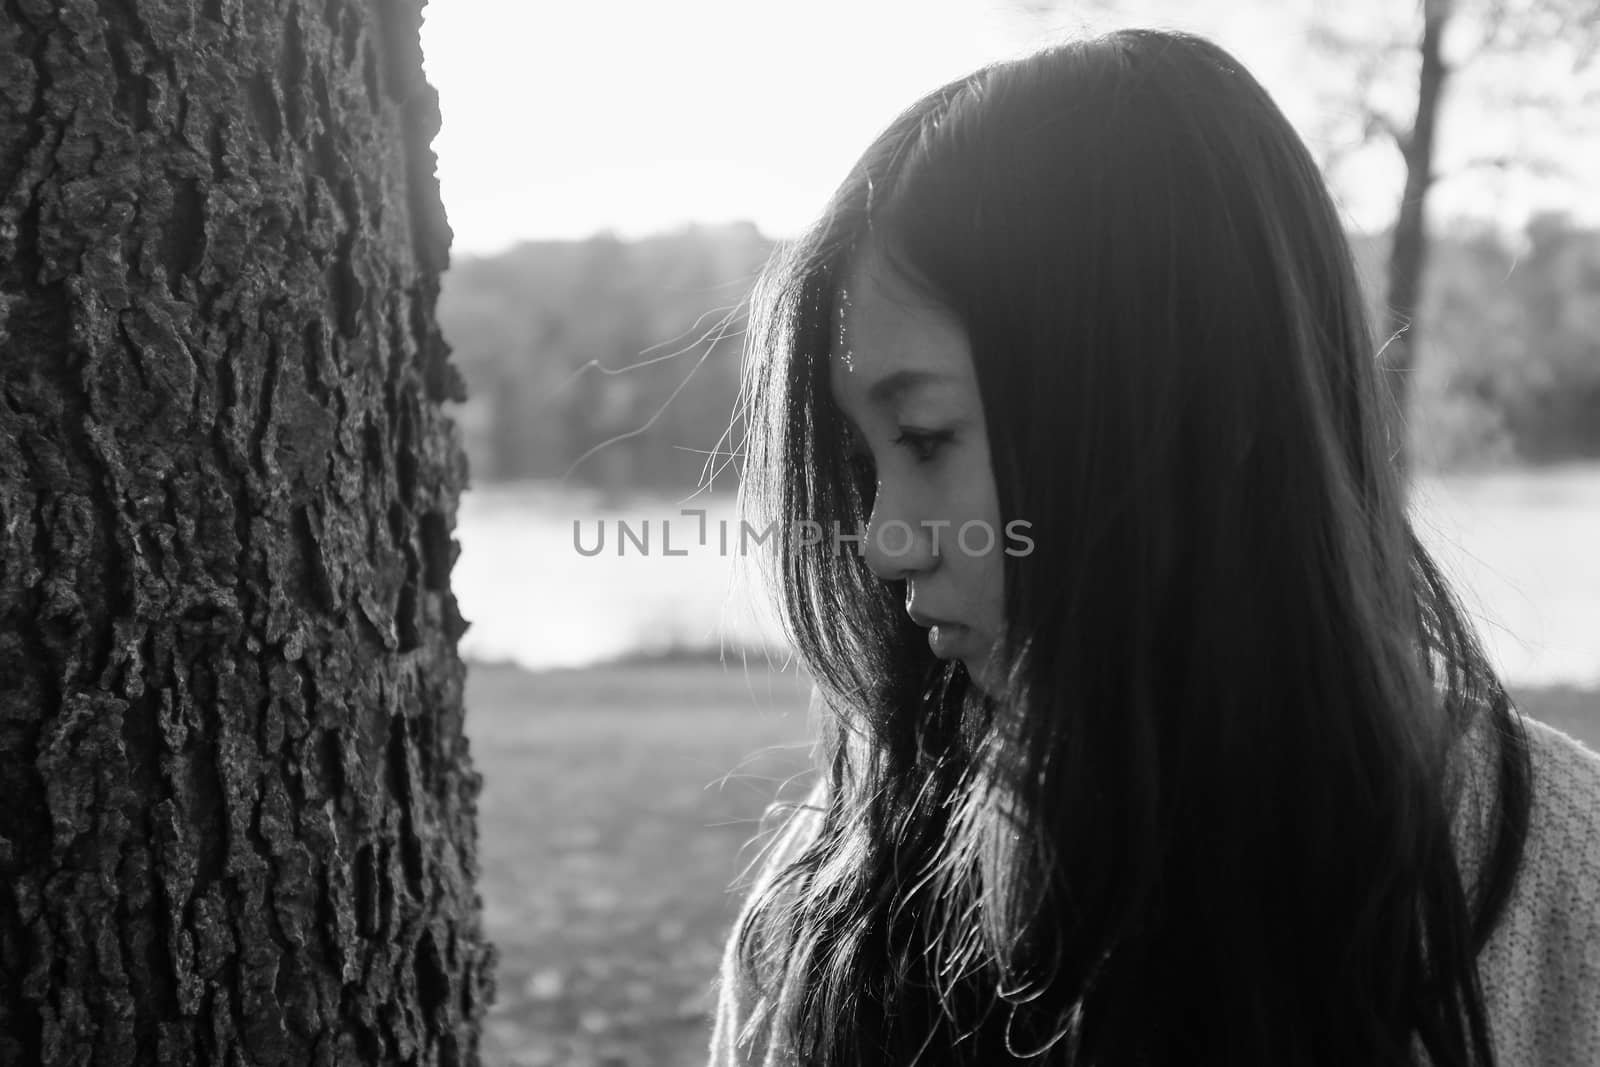 Woman standing next to a tree looking depressed